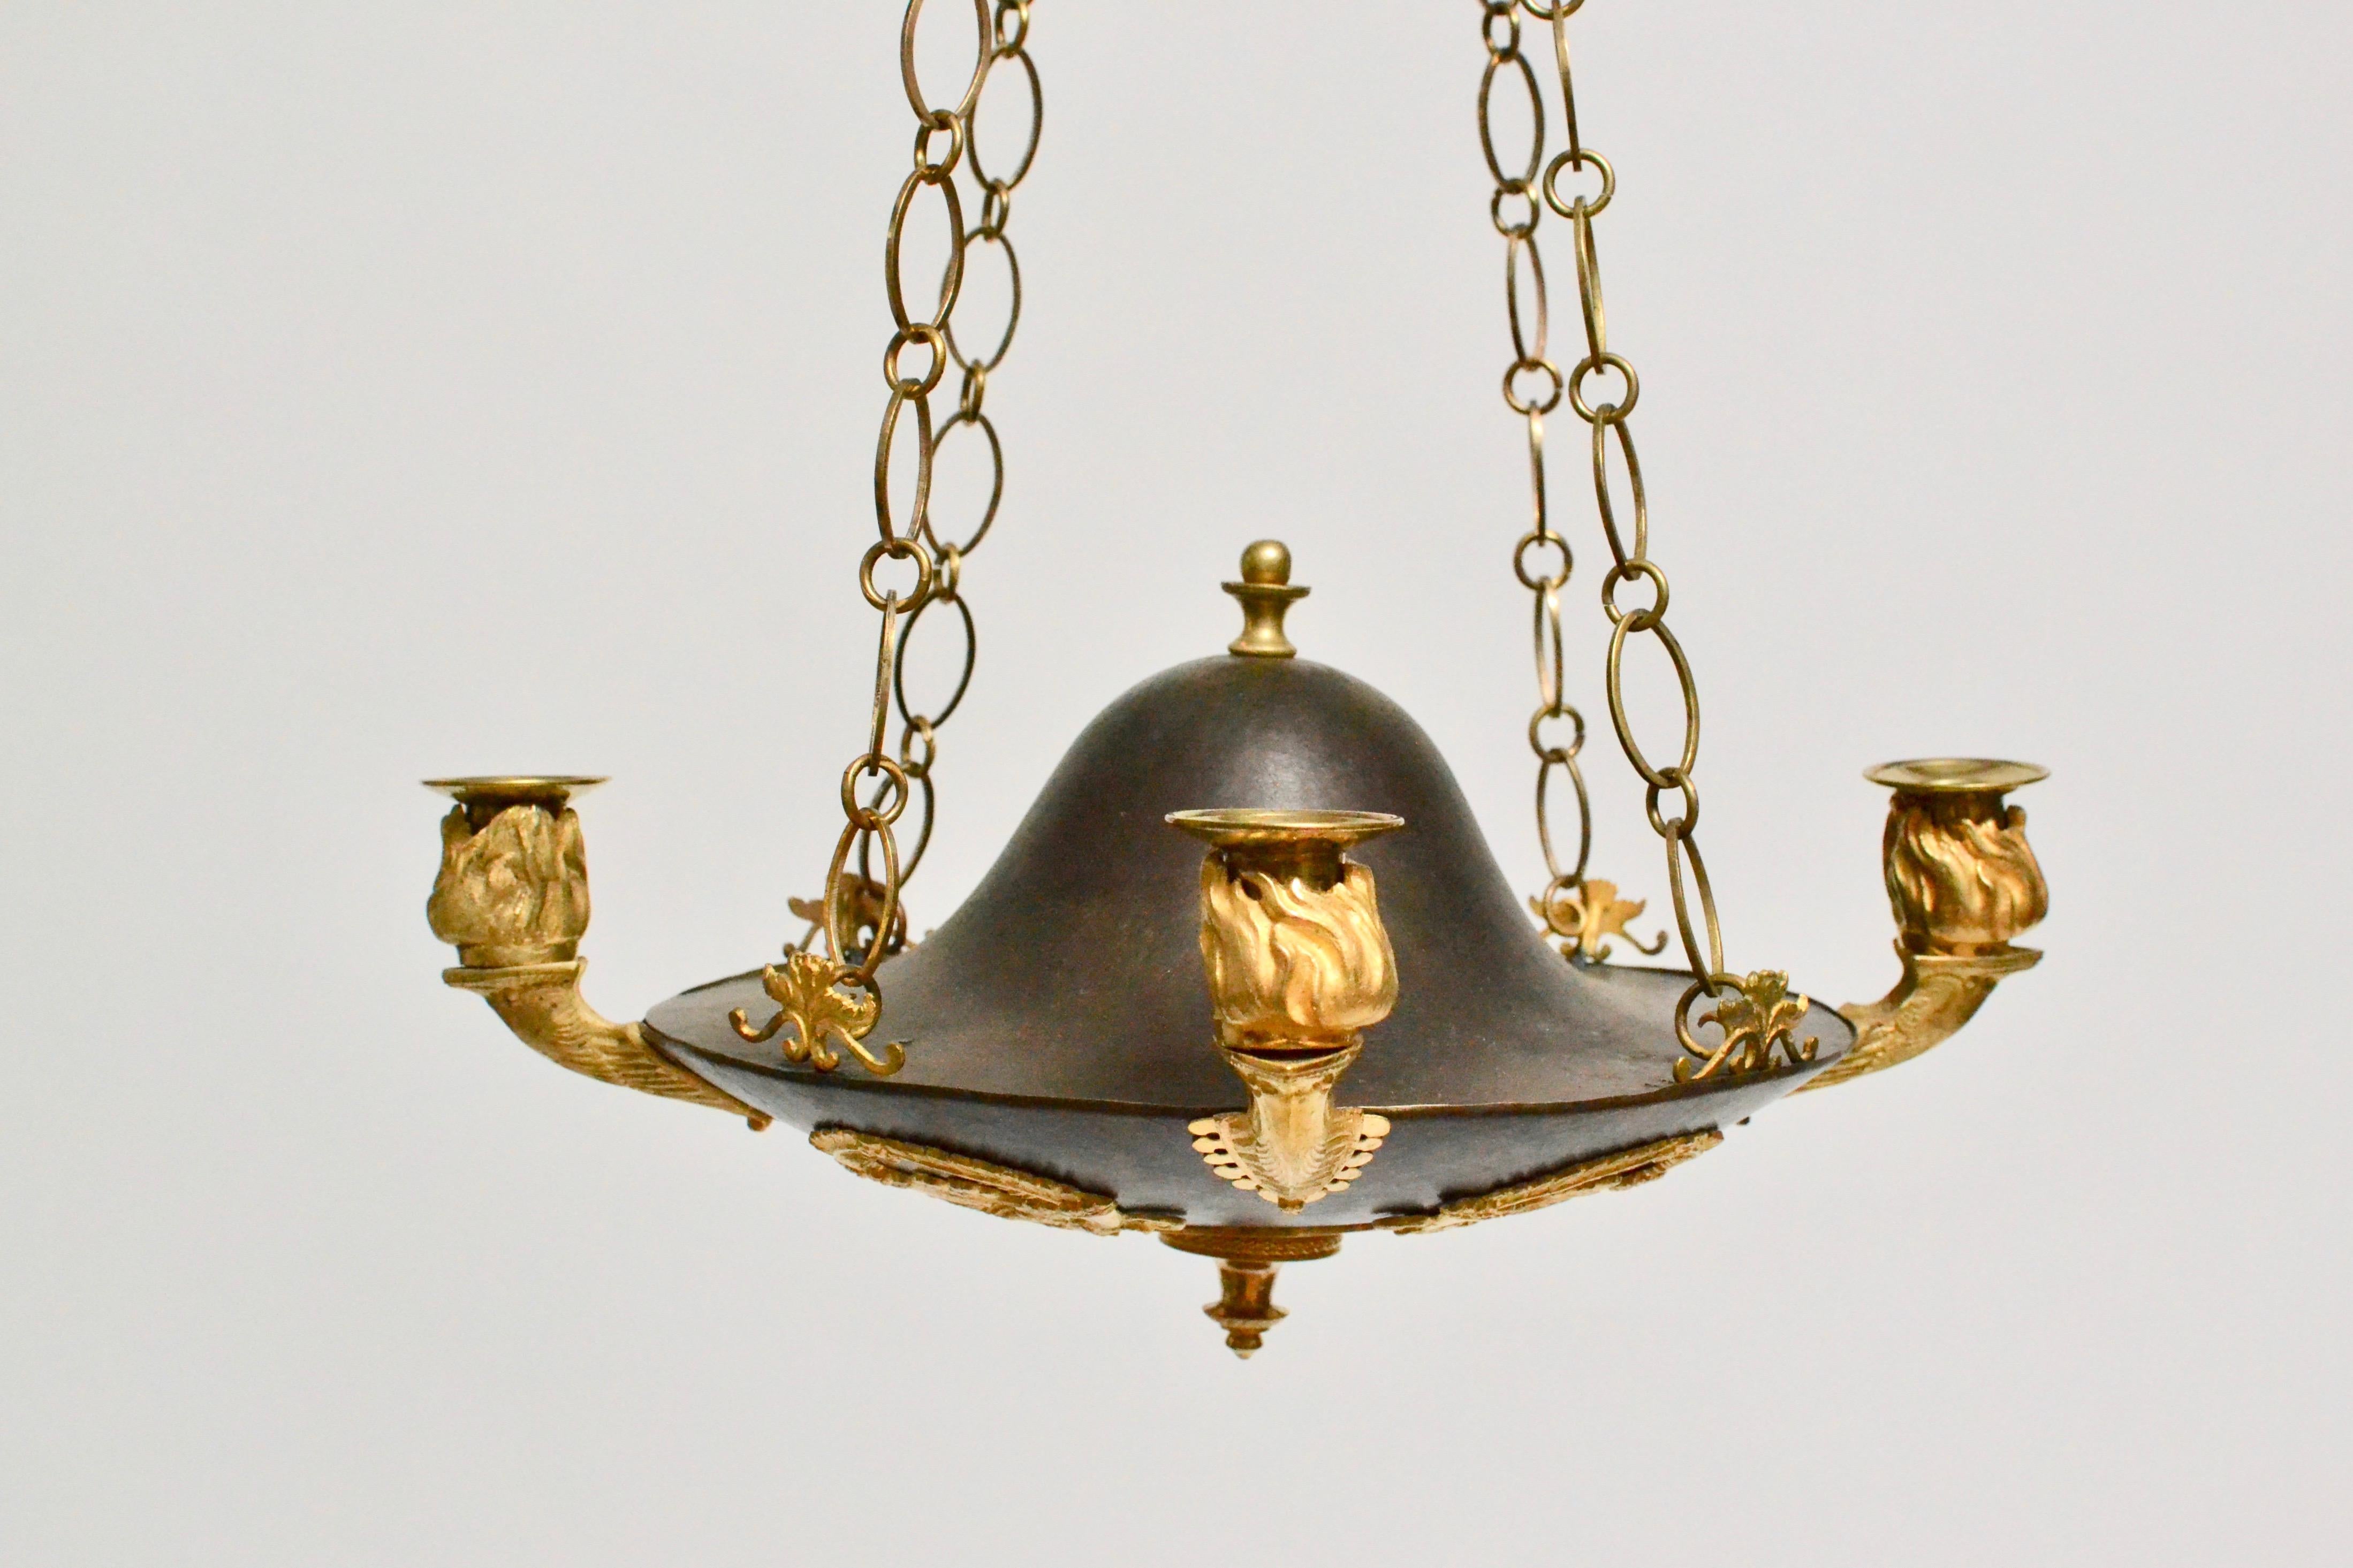 A Swedish Empire gilt and patinated bronze chandelier made, circa 1810-1820.